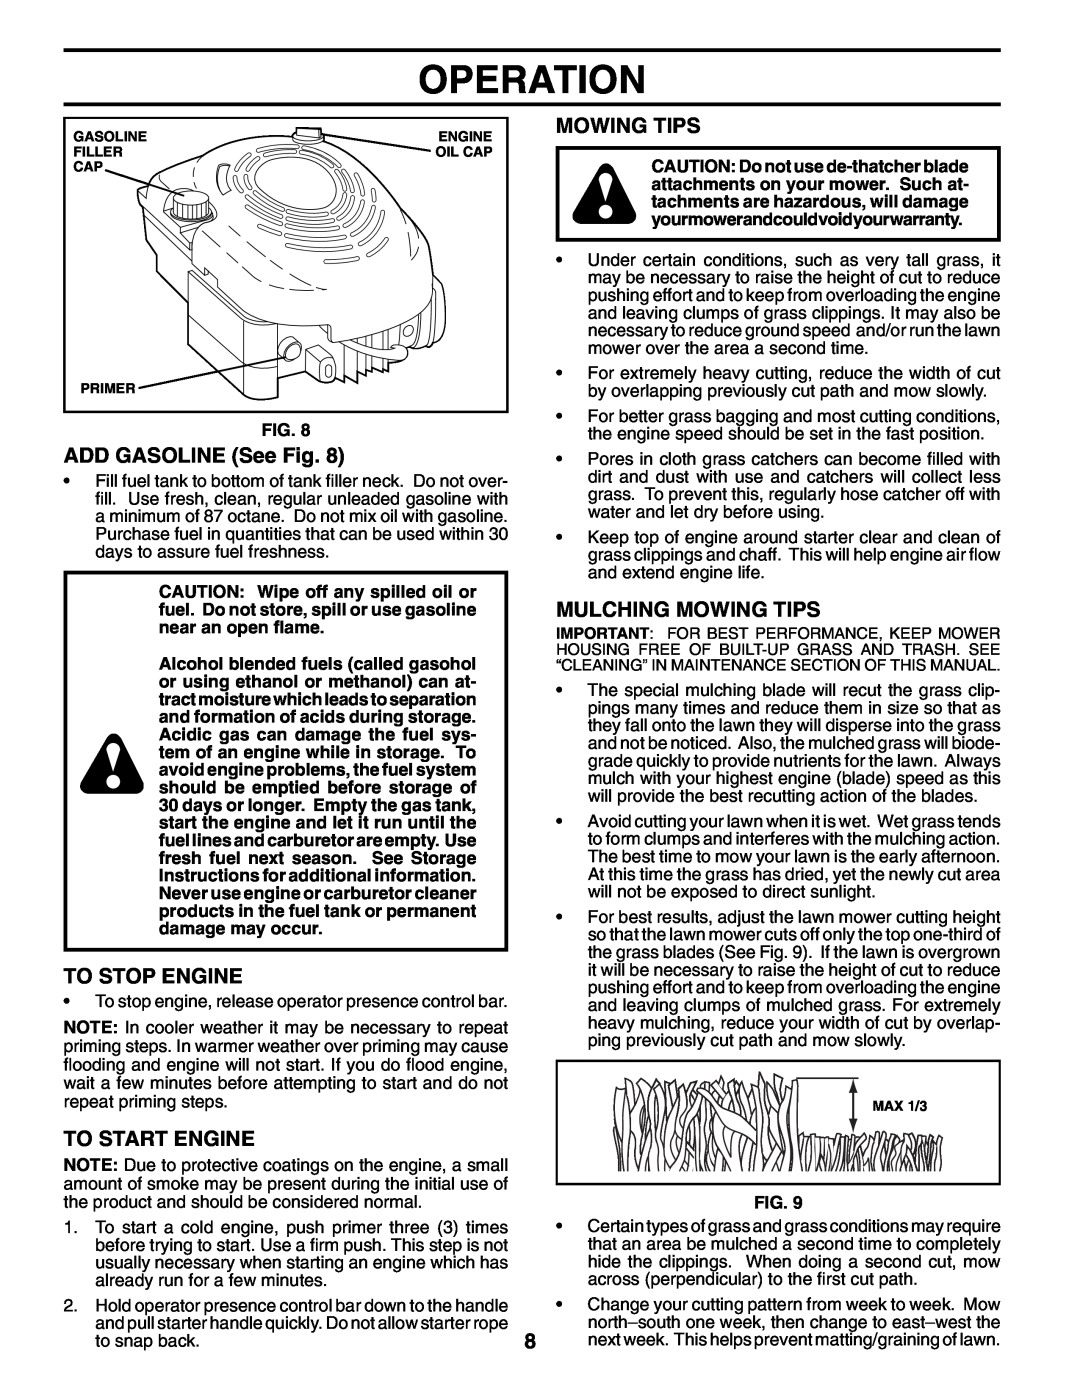 Husqvarna 62522SH owner manual ADD GASOLINE See Fig, To Stop Engine, To Start Engine, Mulching Mowing Tips, Operation 